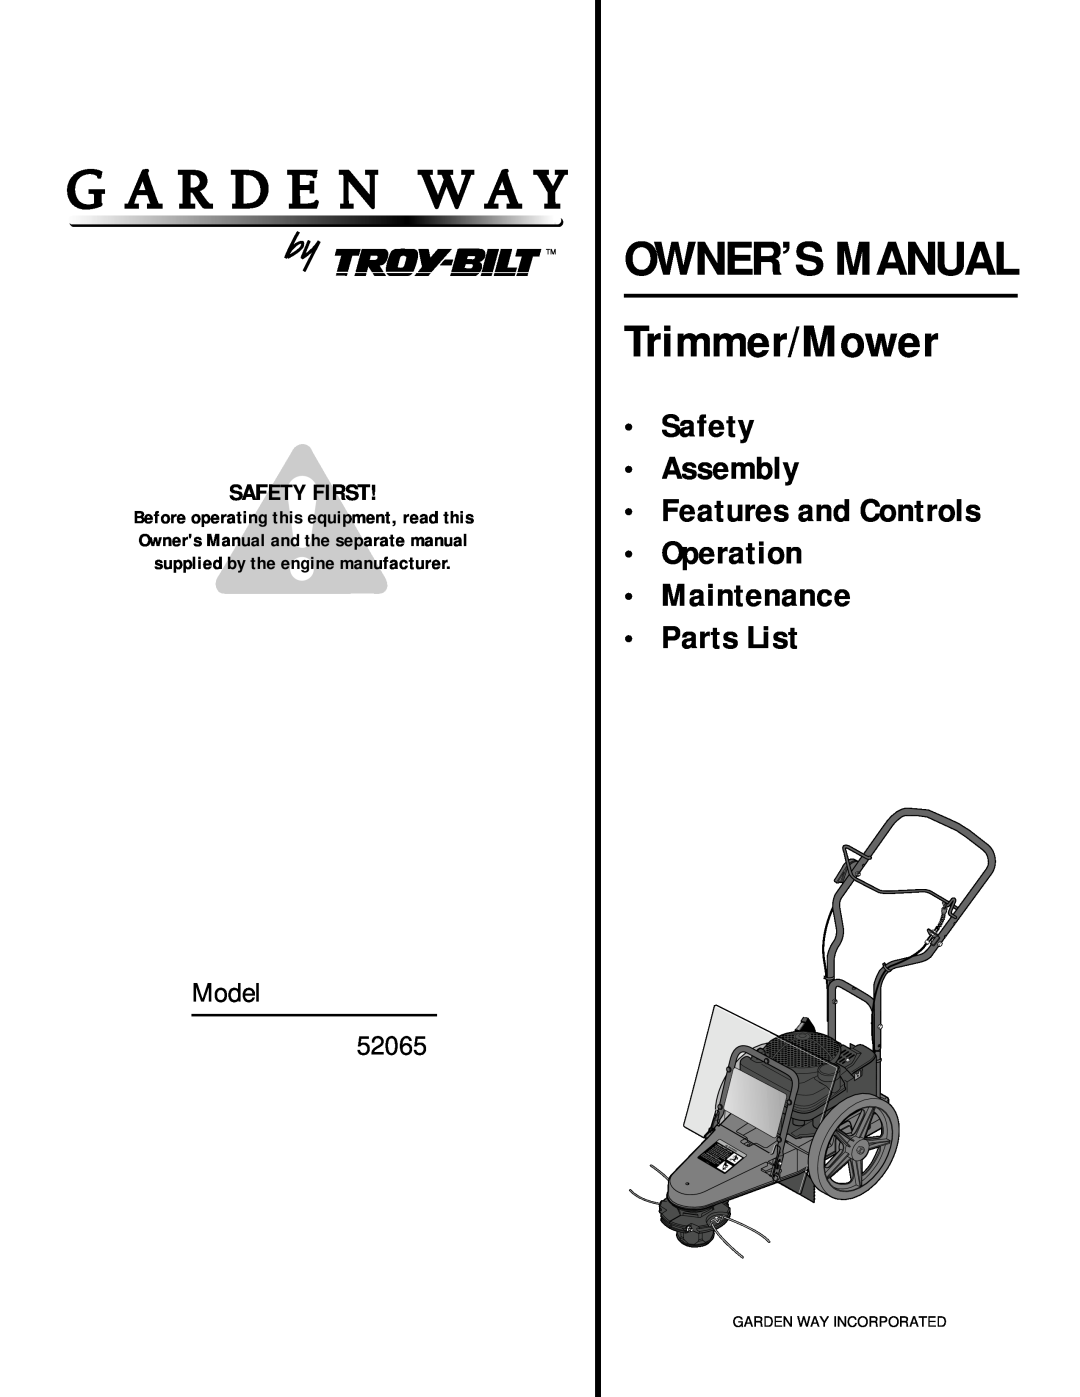 Troy-Bilt 52065 owner manual Safety First, Trimmer/Mower, Safety Assembly Features and Controls Operation Maintenance 